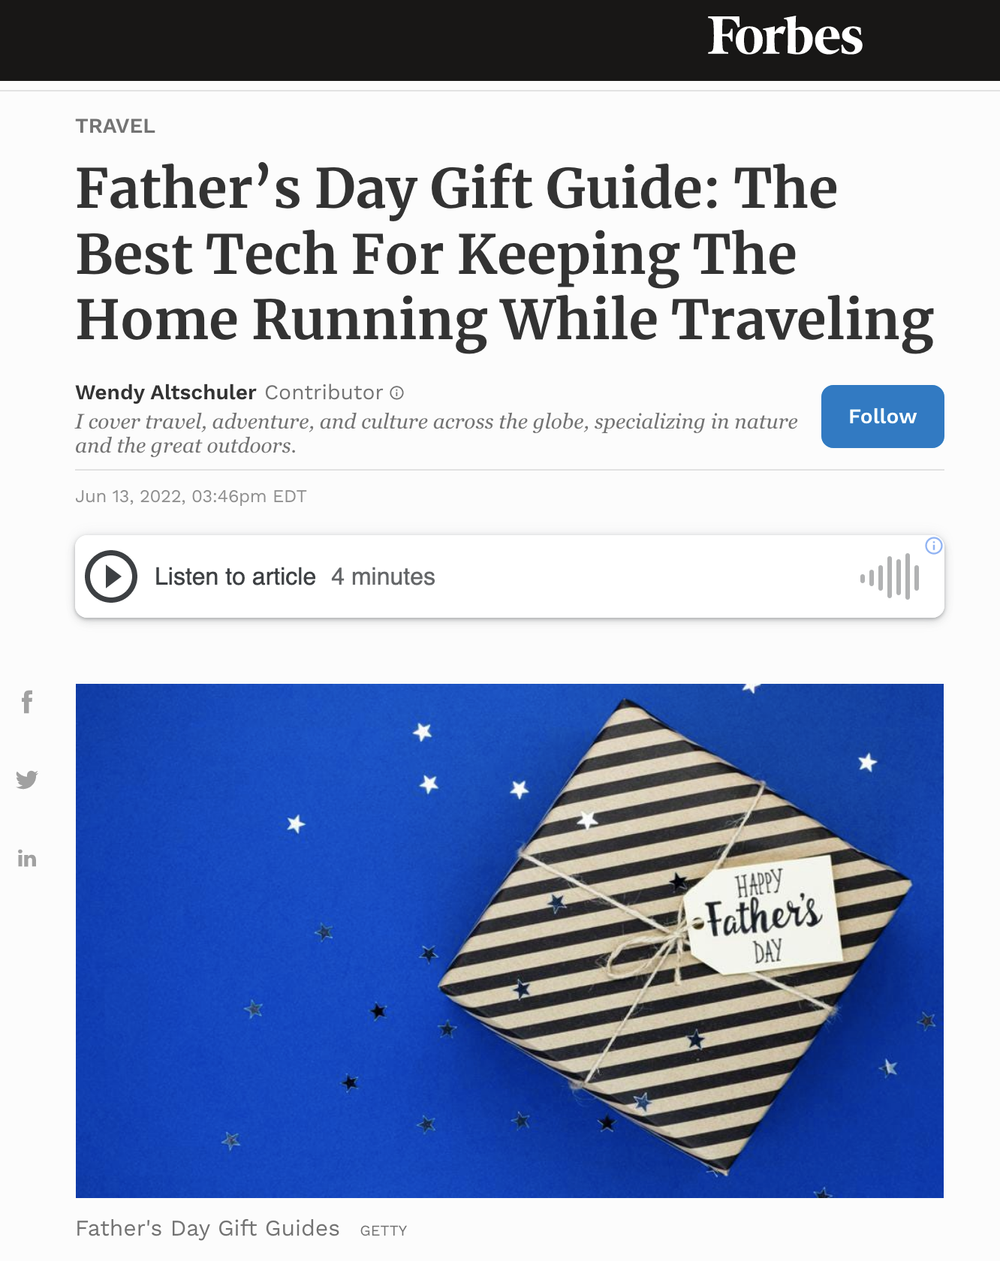 Father’s Day Gift Guide: The Best Tech For Keeping The Home Running While Traveling